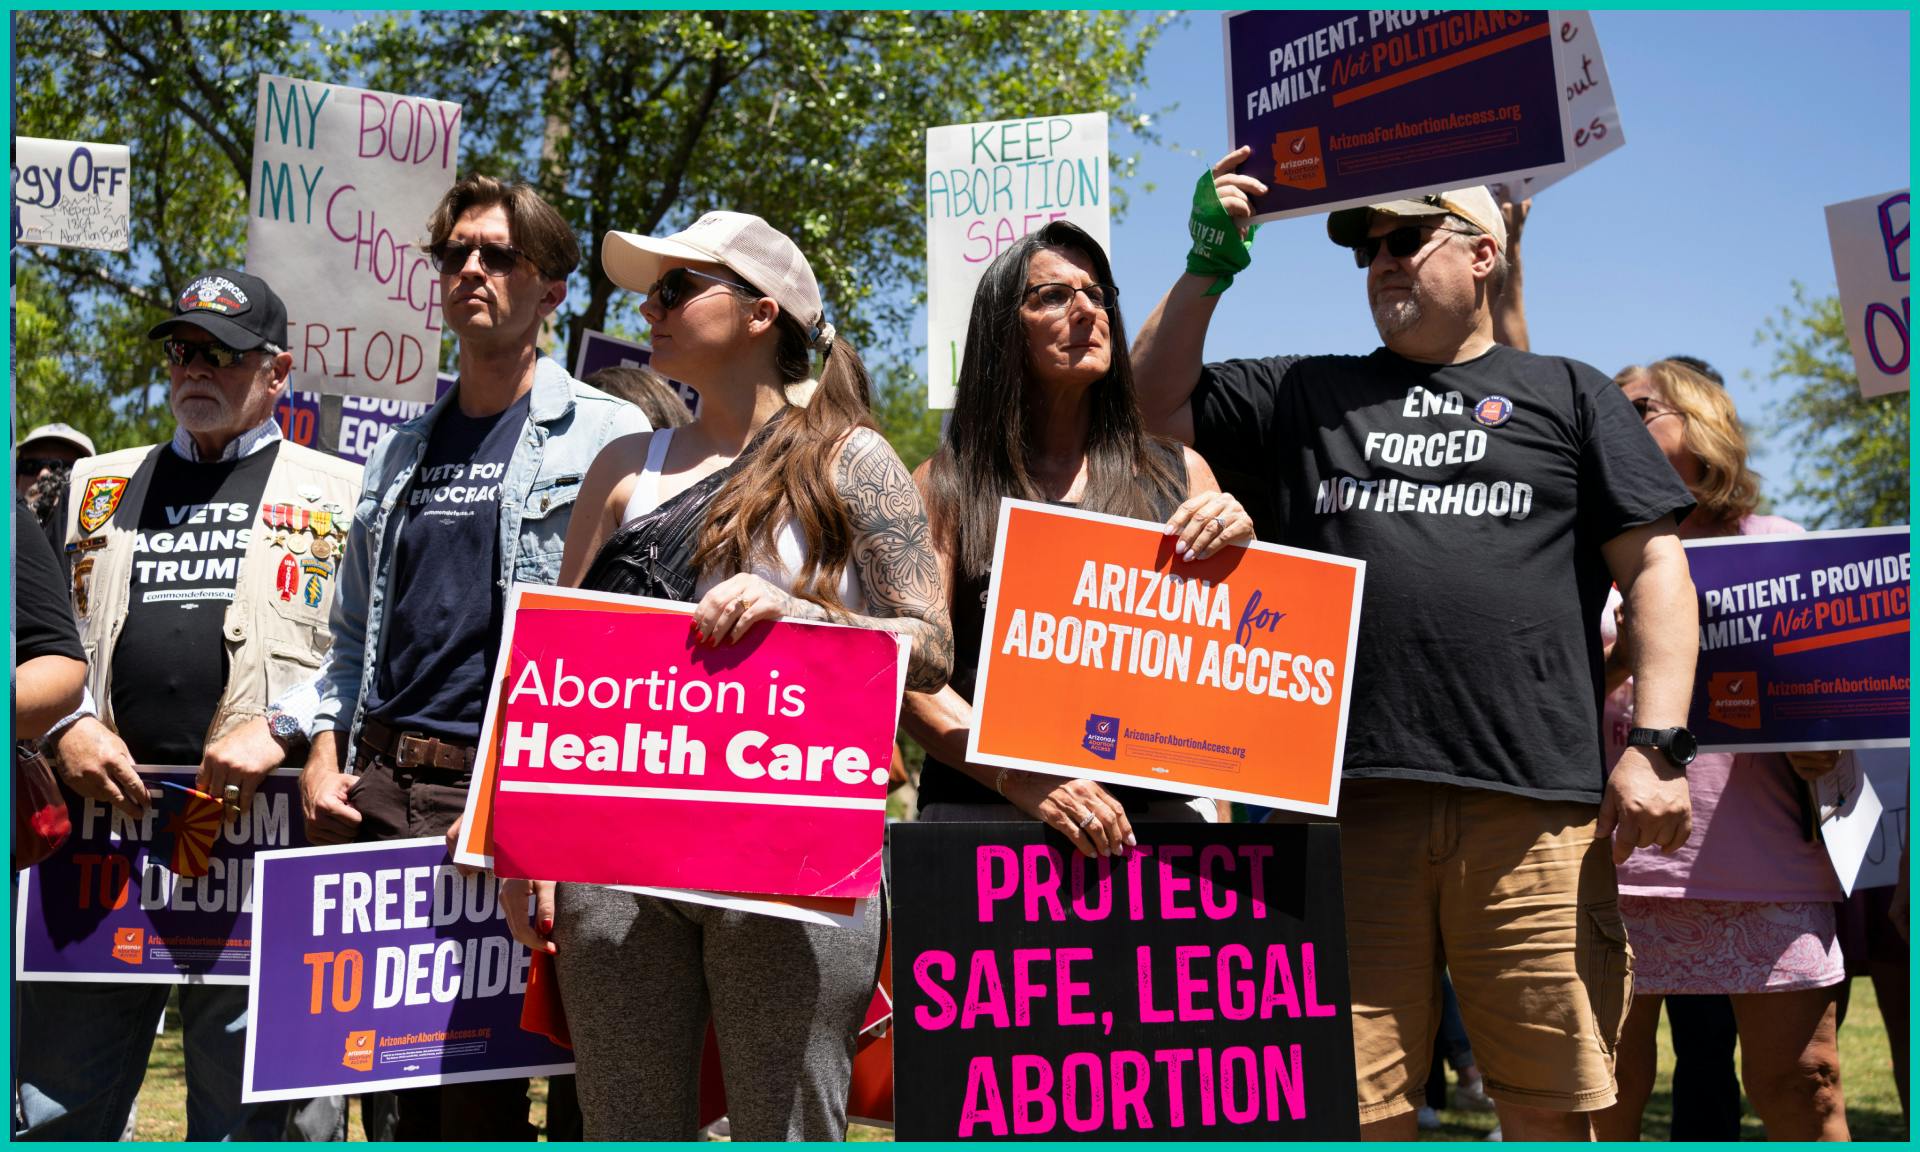 Members of Arizona for Abortion Access, the ballot initiative to enshrine abortion rights in the Arizona State Constitution, hold a press conference and protest condemning Arizona House Republicans and the 1864 abortion ban